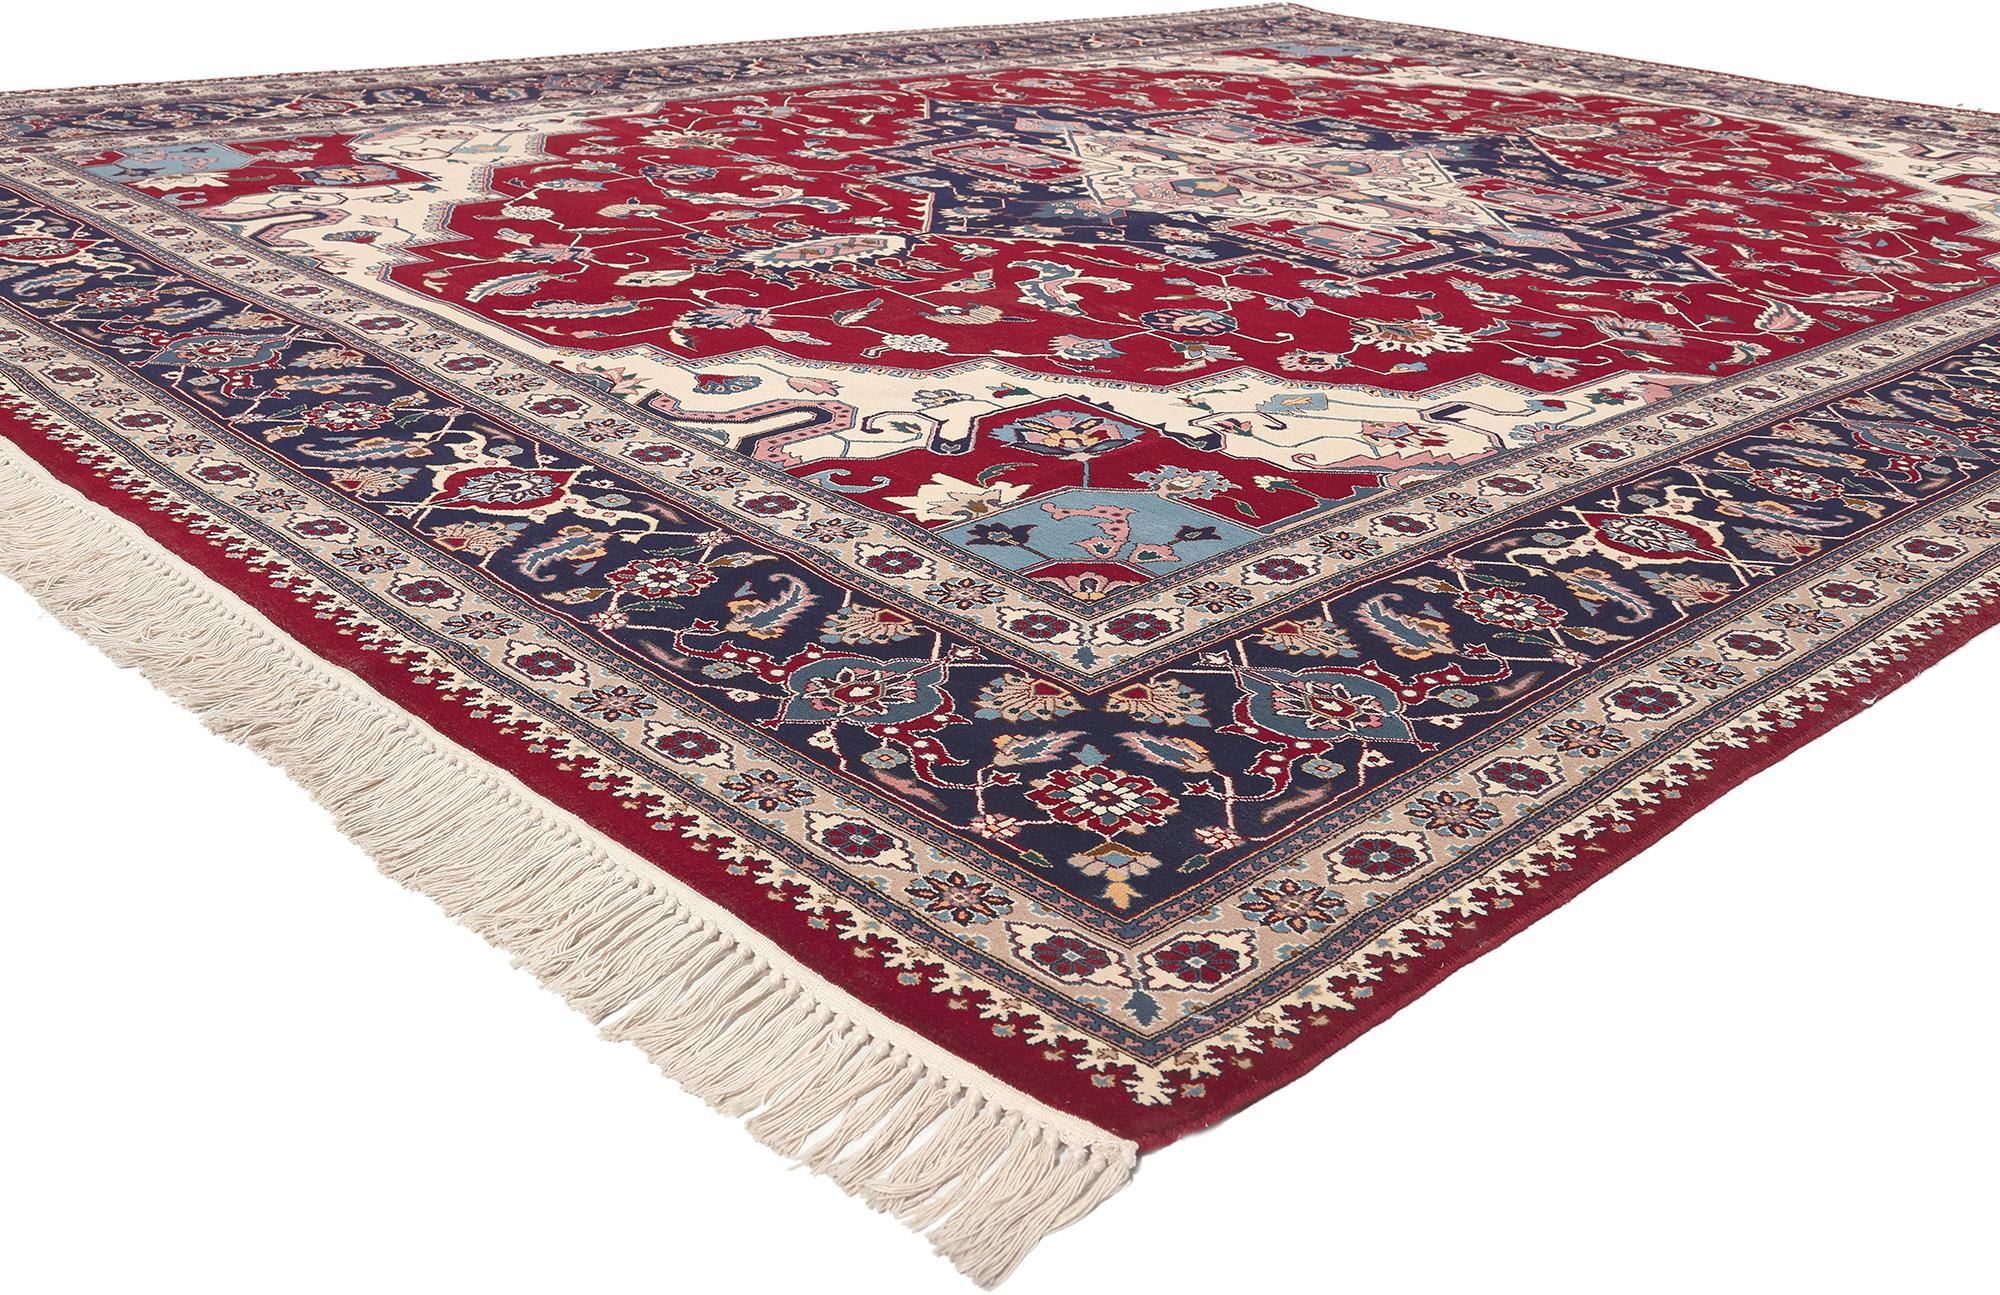 72064 Vintage Pakistani Serapi Rug, 09’00 x 12’01.
Stately elegance meets timeless appeal in this hand knotted wool vintage Pakistani Serapi rug. The decorative geometric details and sophisticated color palette woven into this piece work together